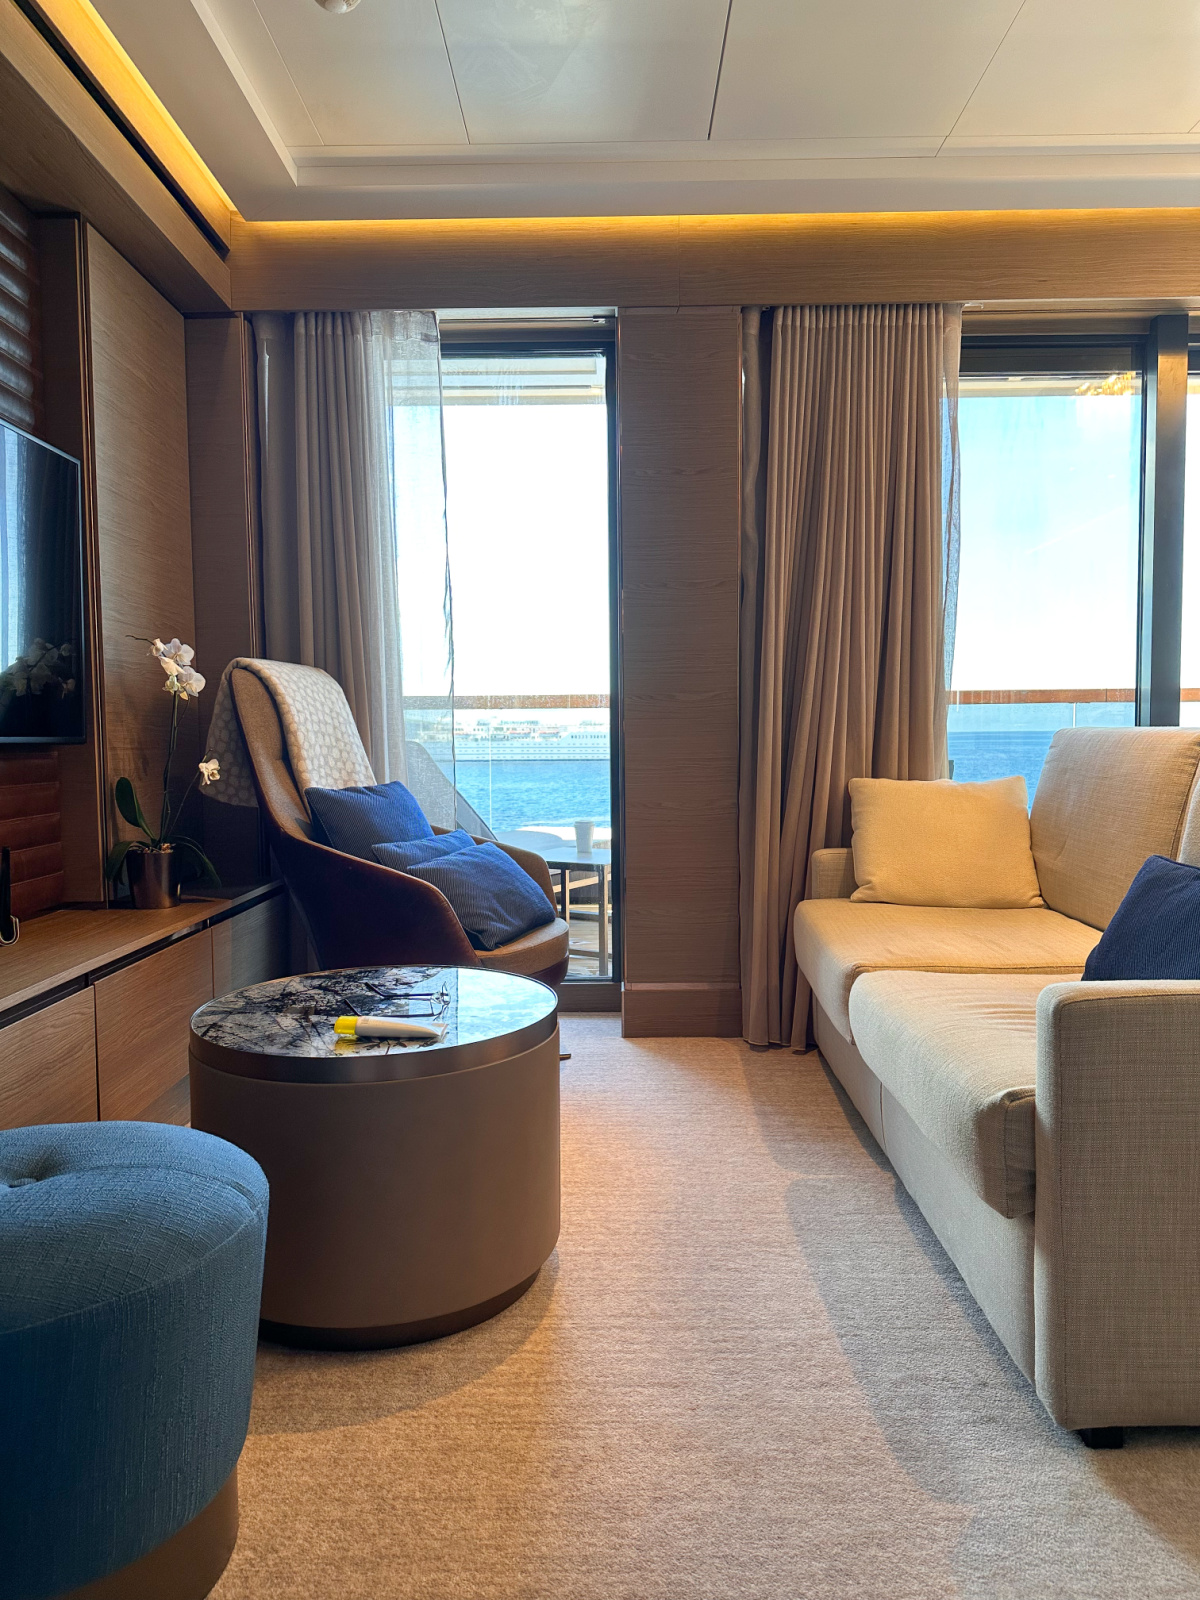 Living area of Signature Suite on Evrima yacht.